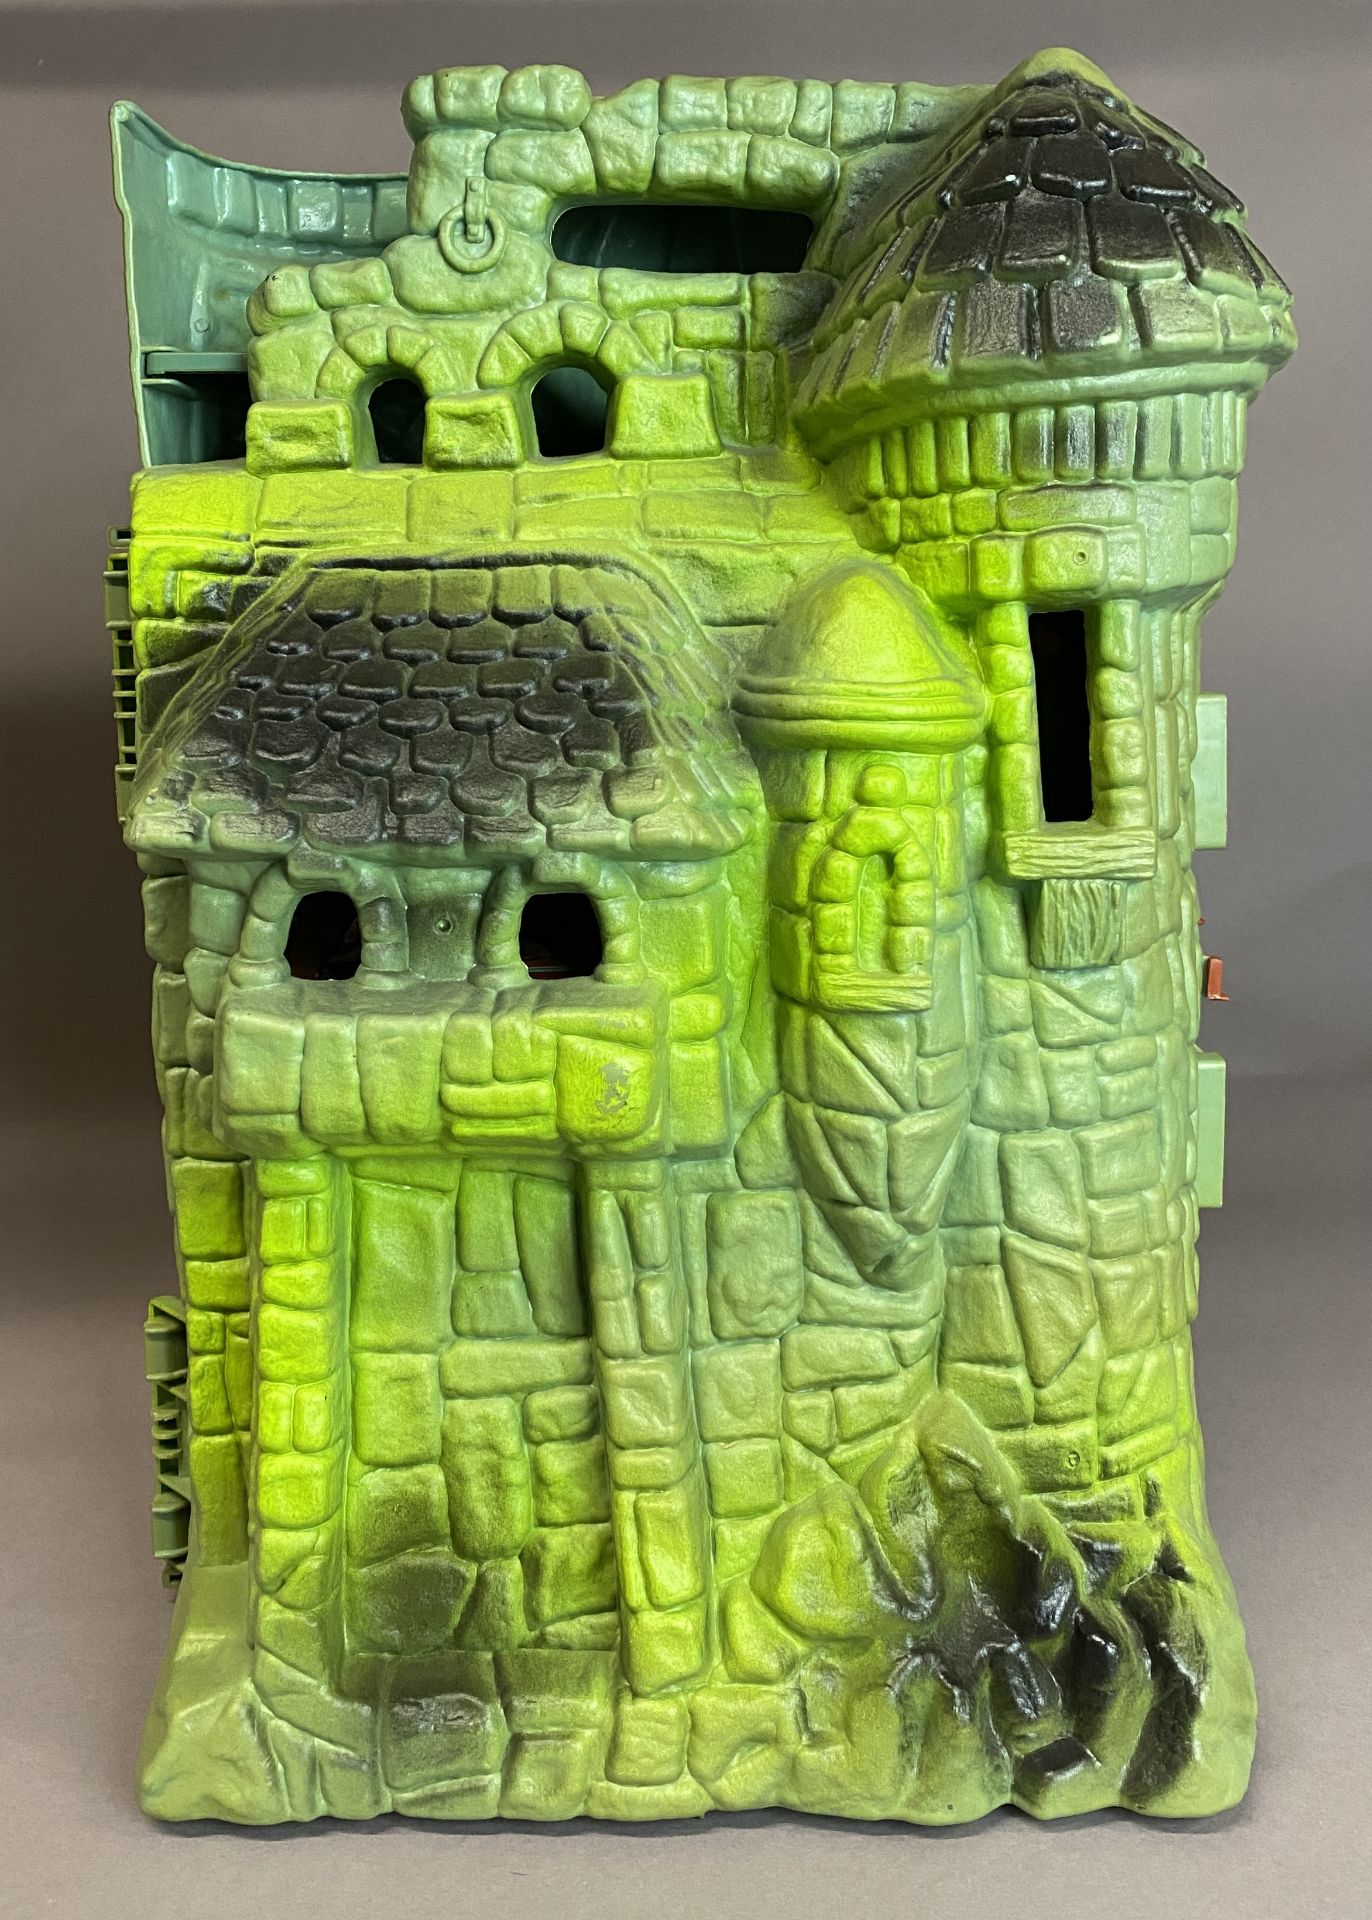 CASTLE GRAYSKULL - Vintage Masters of the Universe Playset (MOTU) - Complete with all accessories - Image 5 of 12